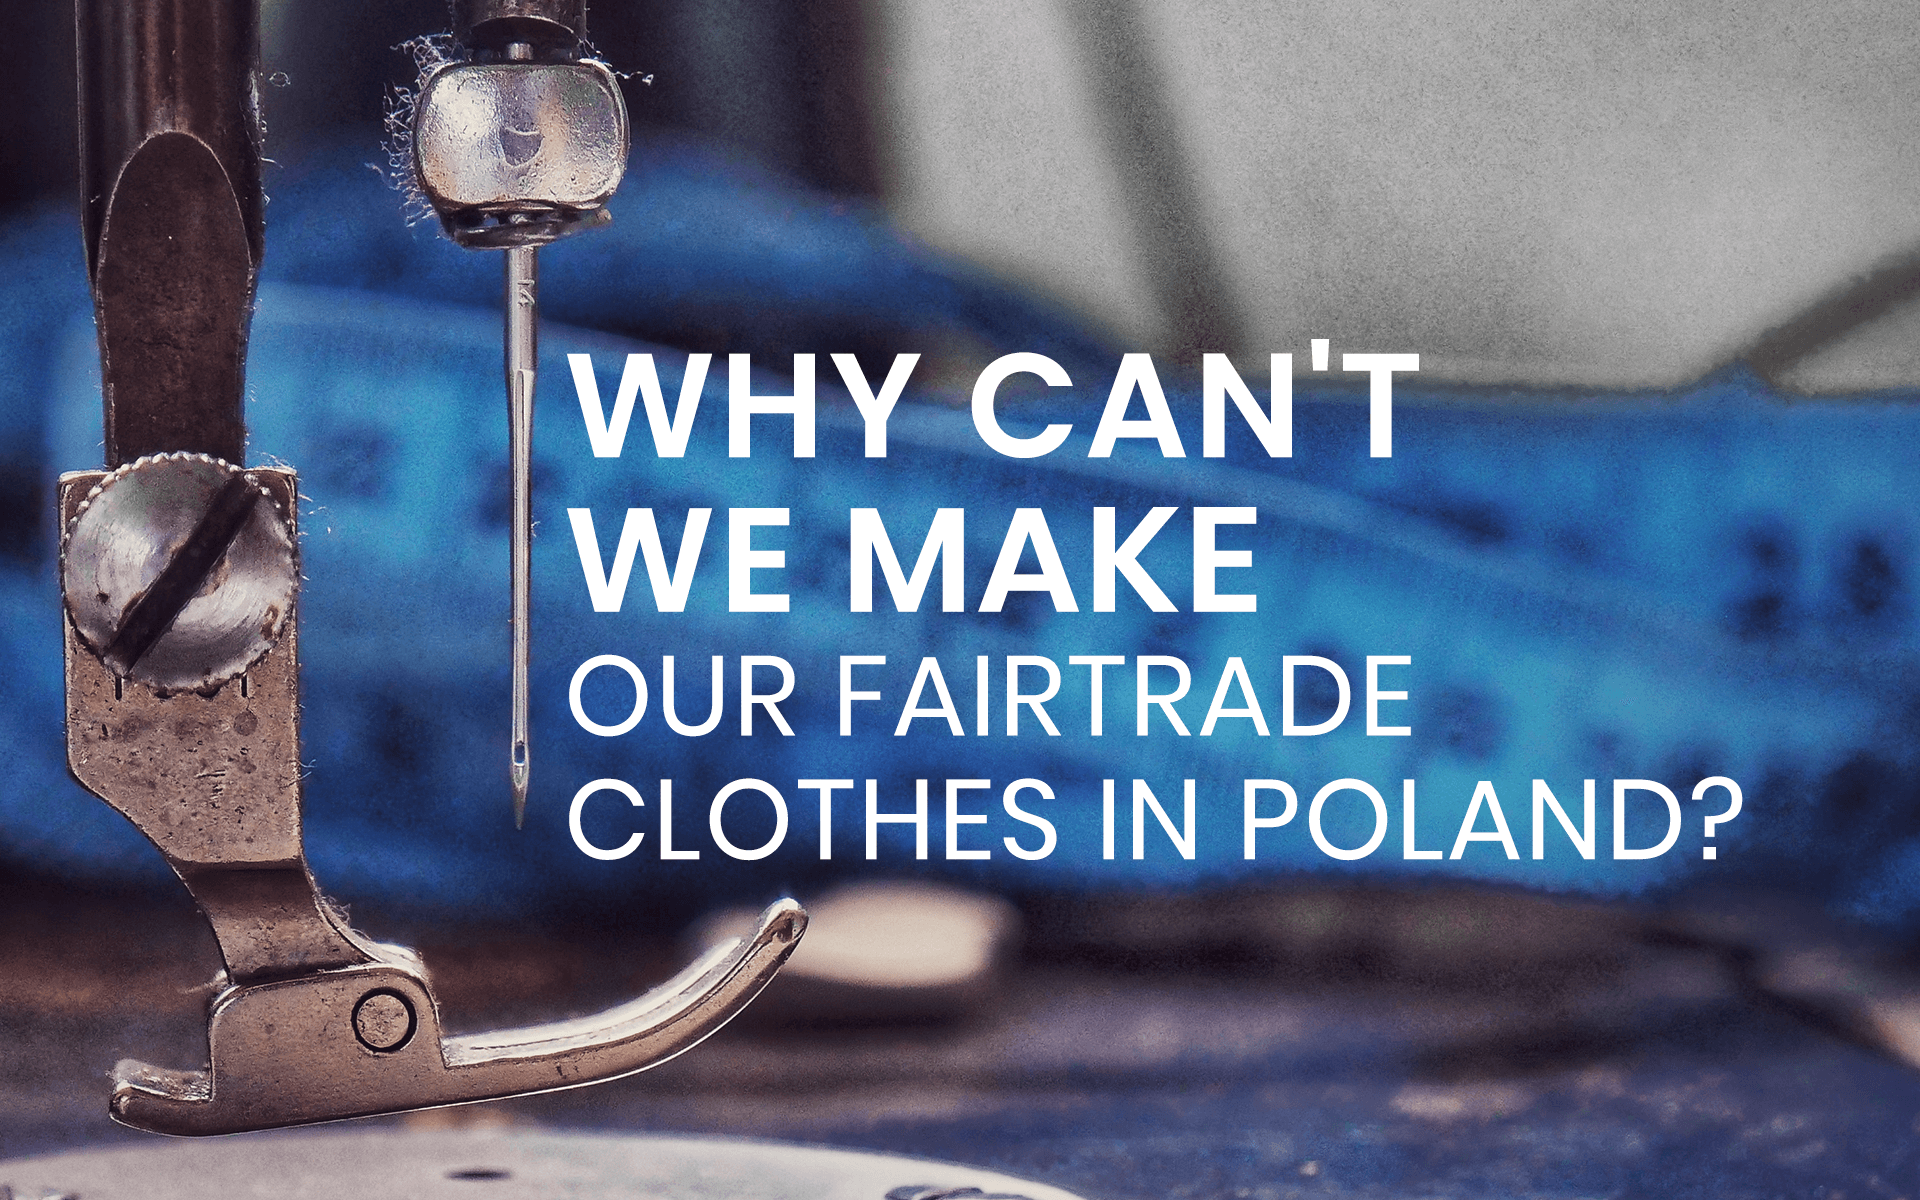 Why can’t we make our Fairtrade clothes in Poland?